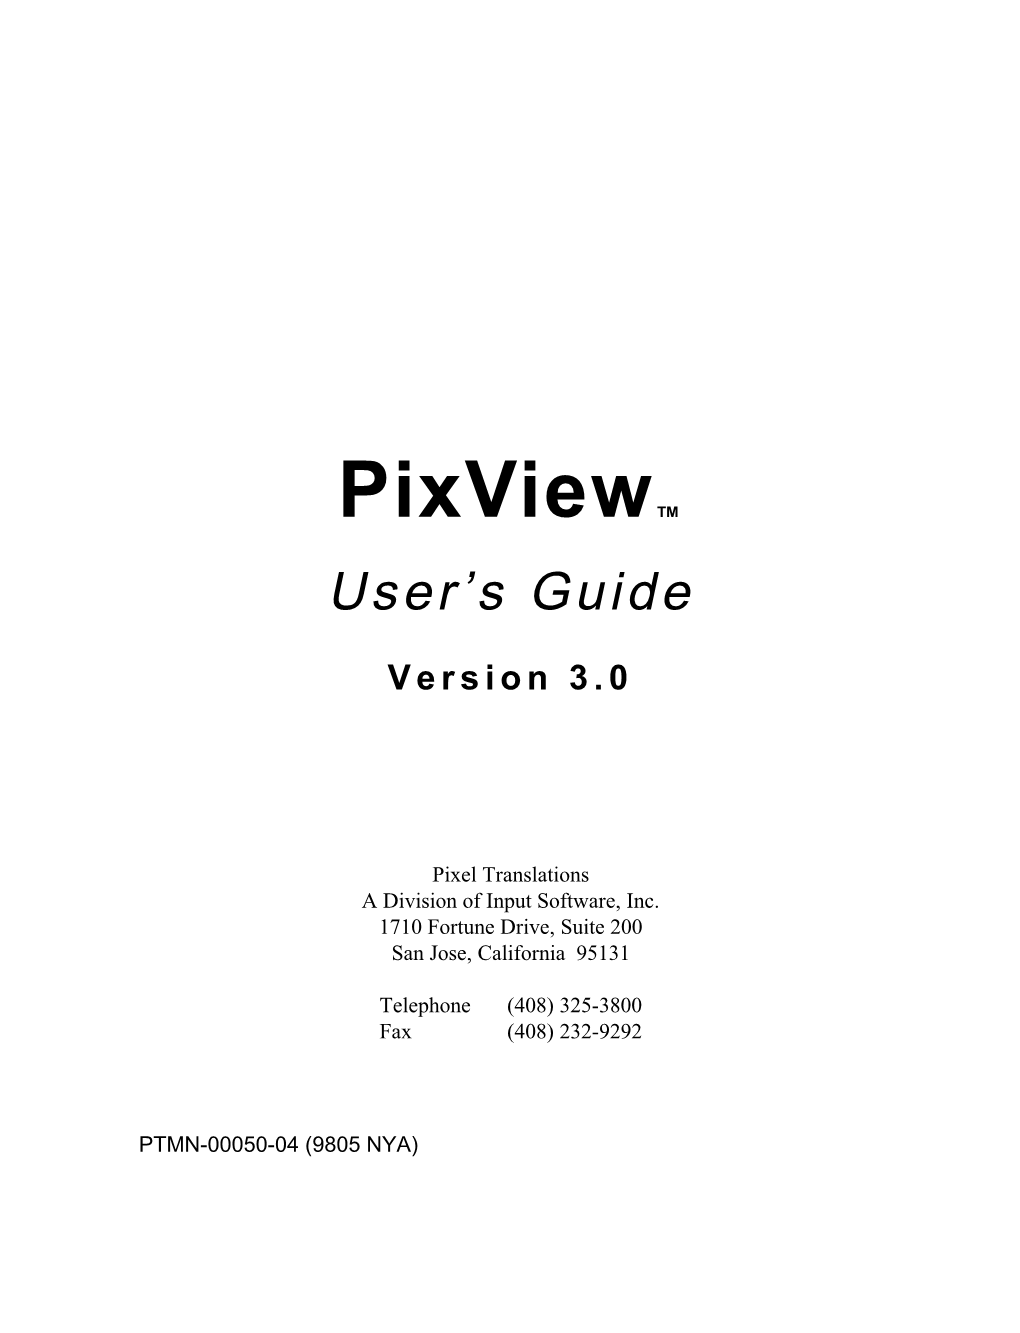 Pixview User's Guide